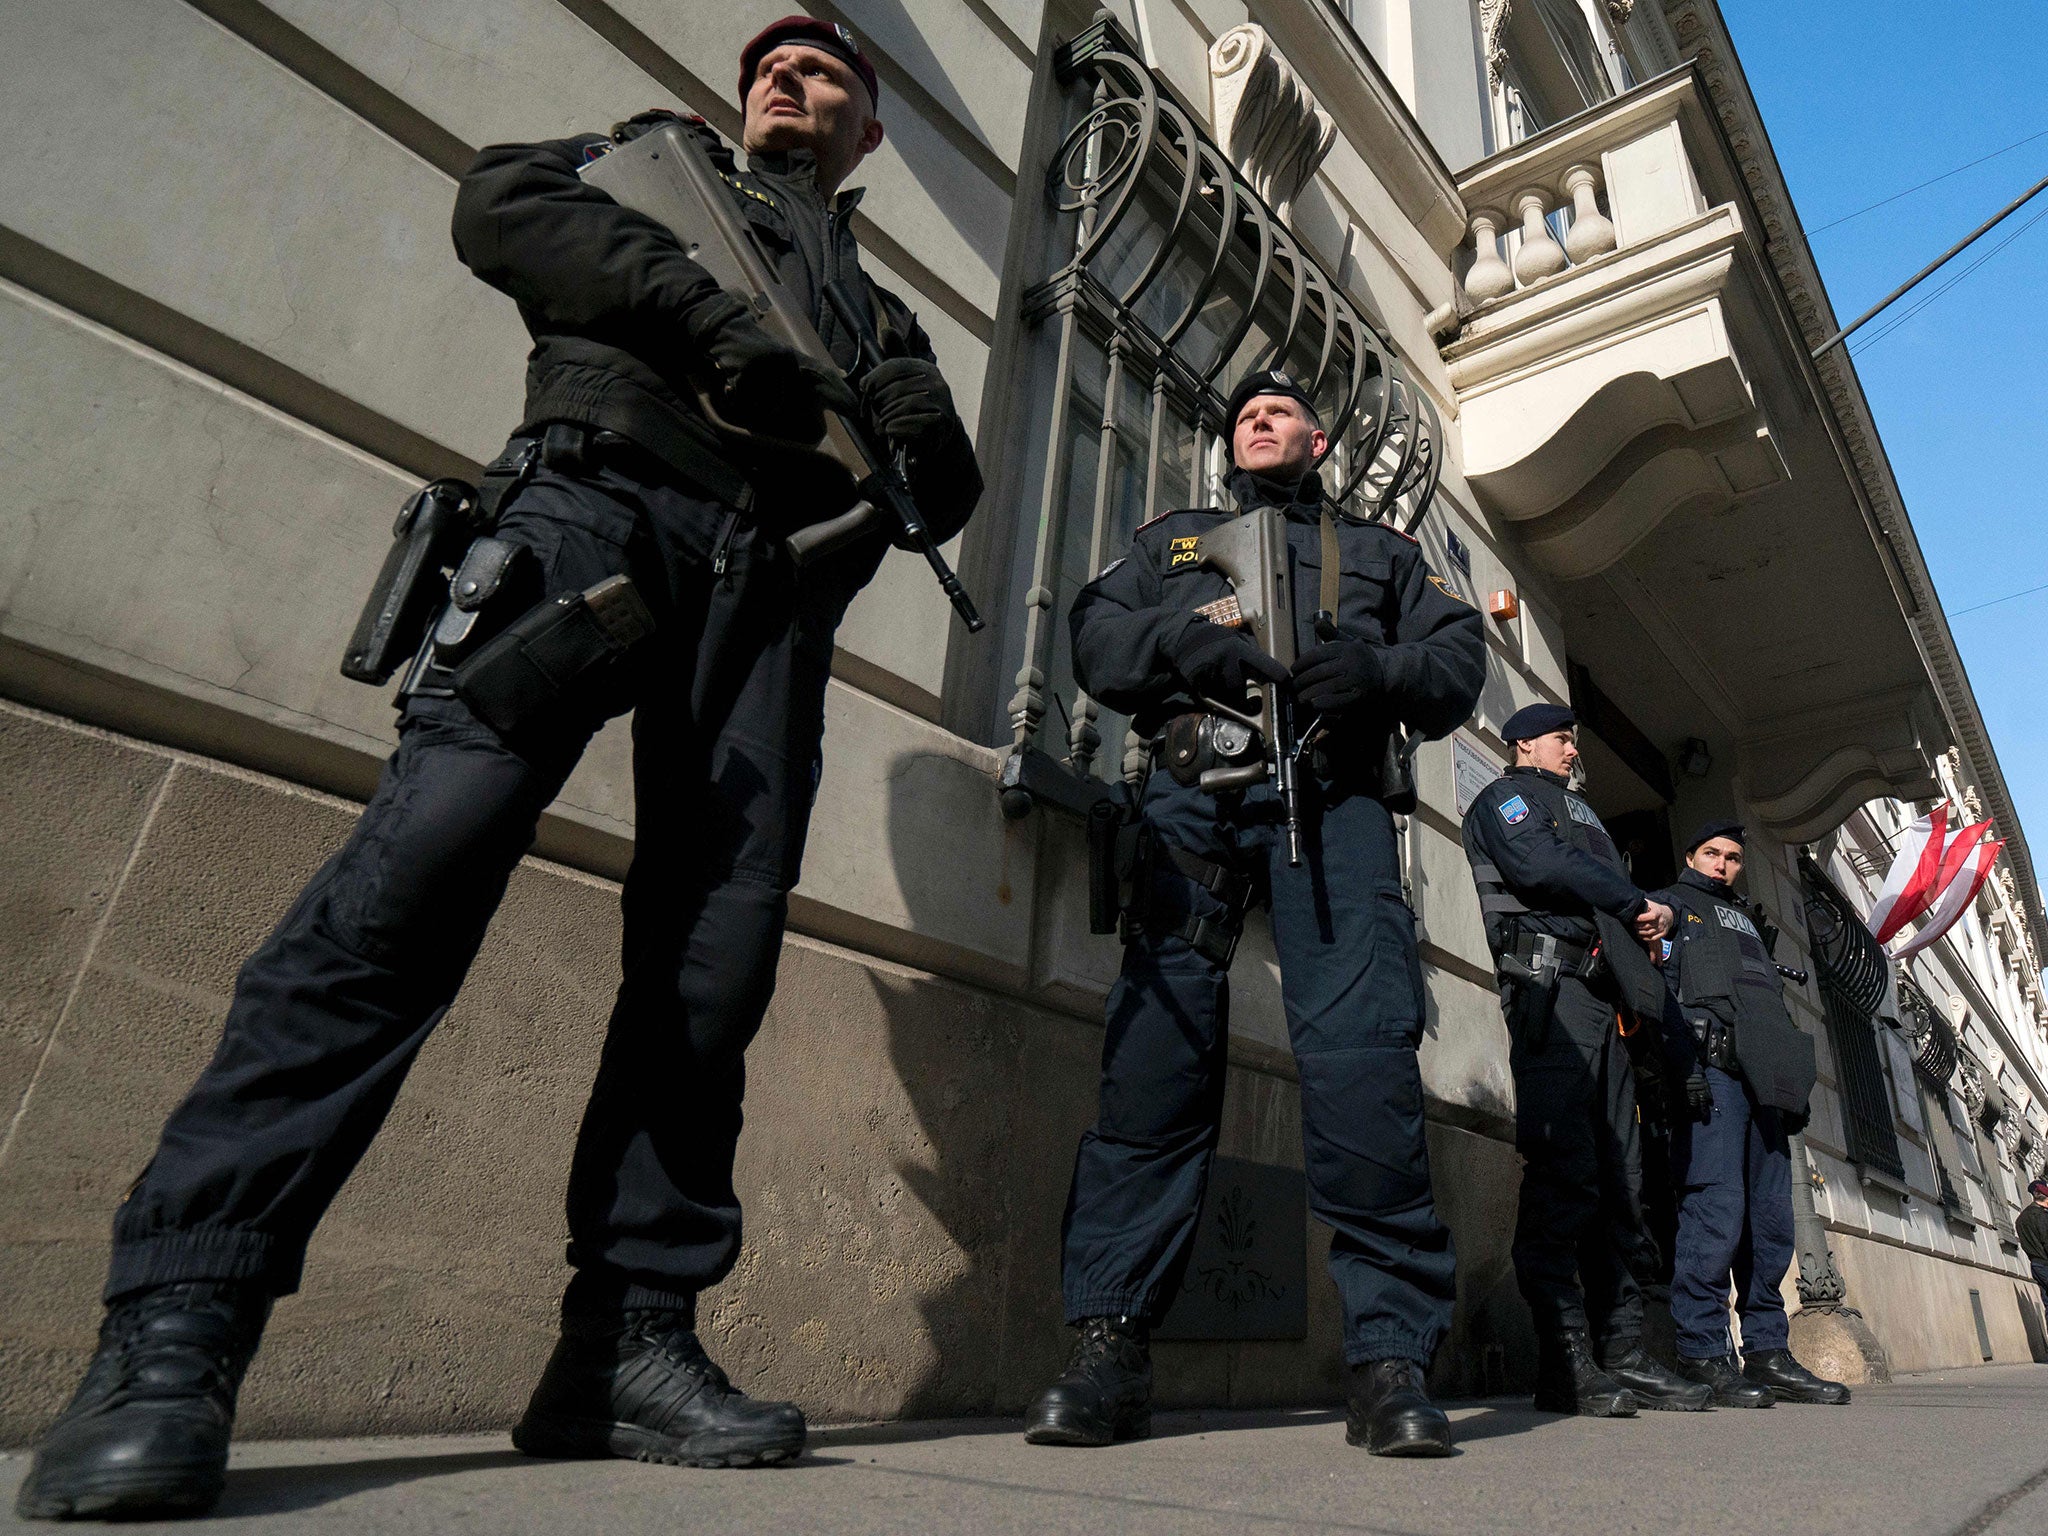 Austrian police officers guard the entrance to the West-Balkan conference 'Managing Migration together' at the Austrian interior ministry in Vienna, Austria on February 24, 2016.